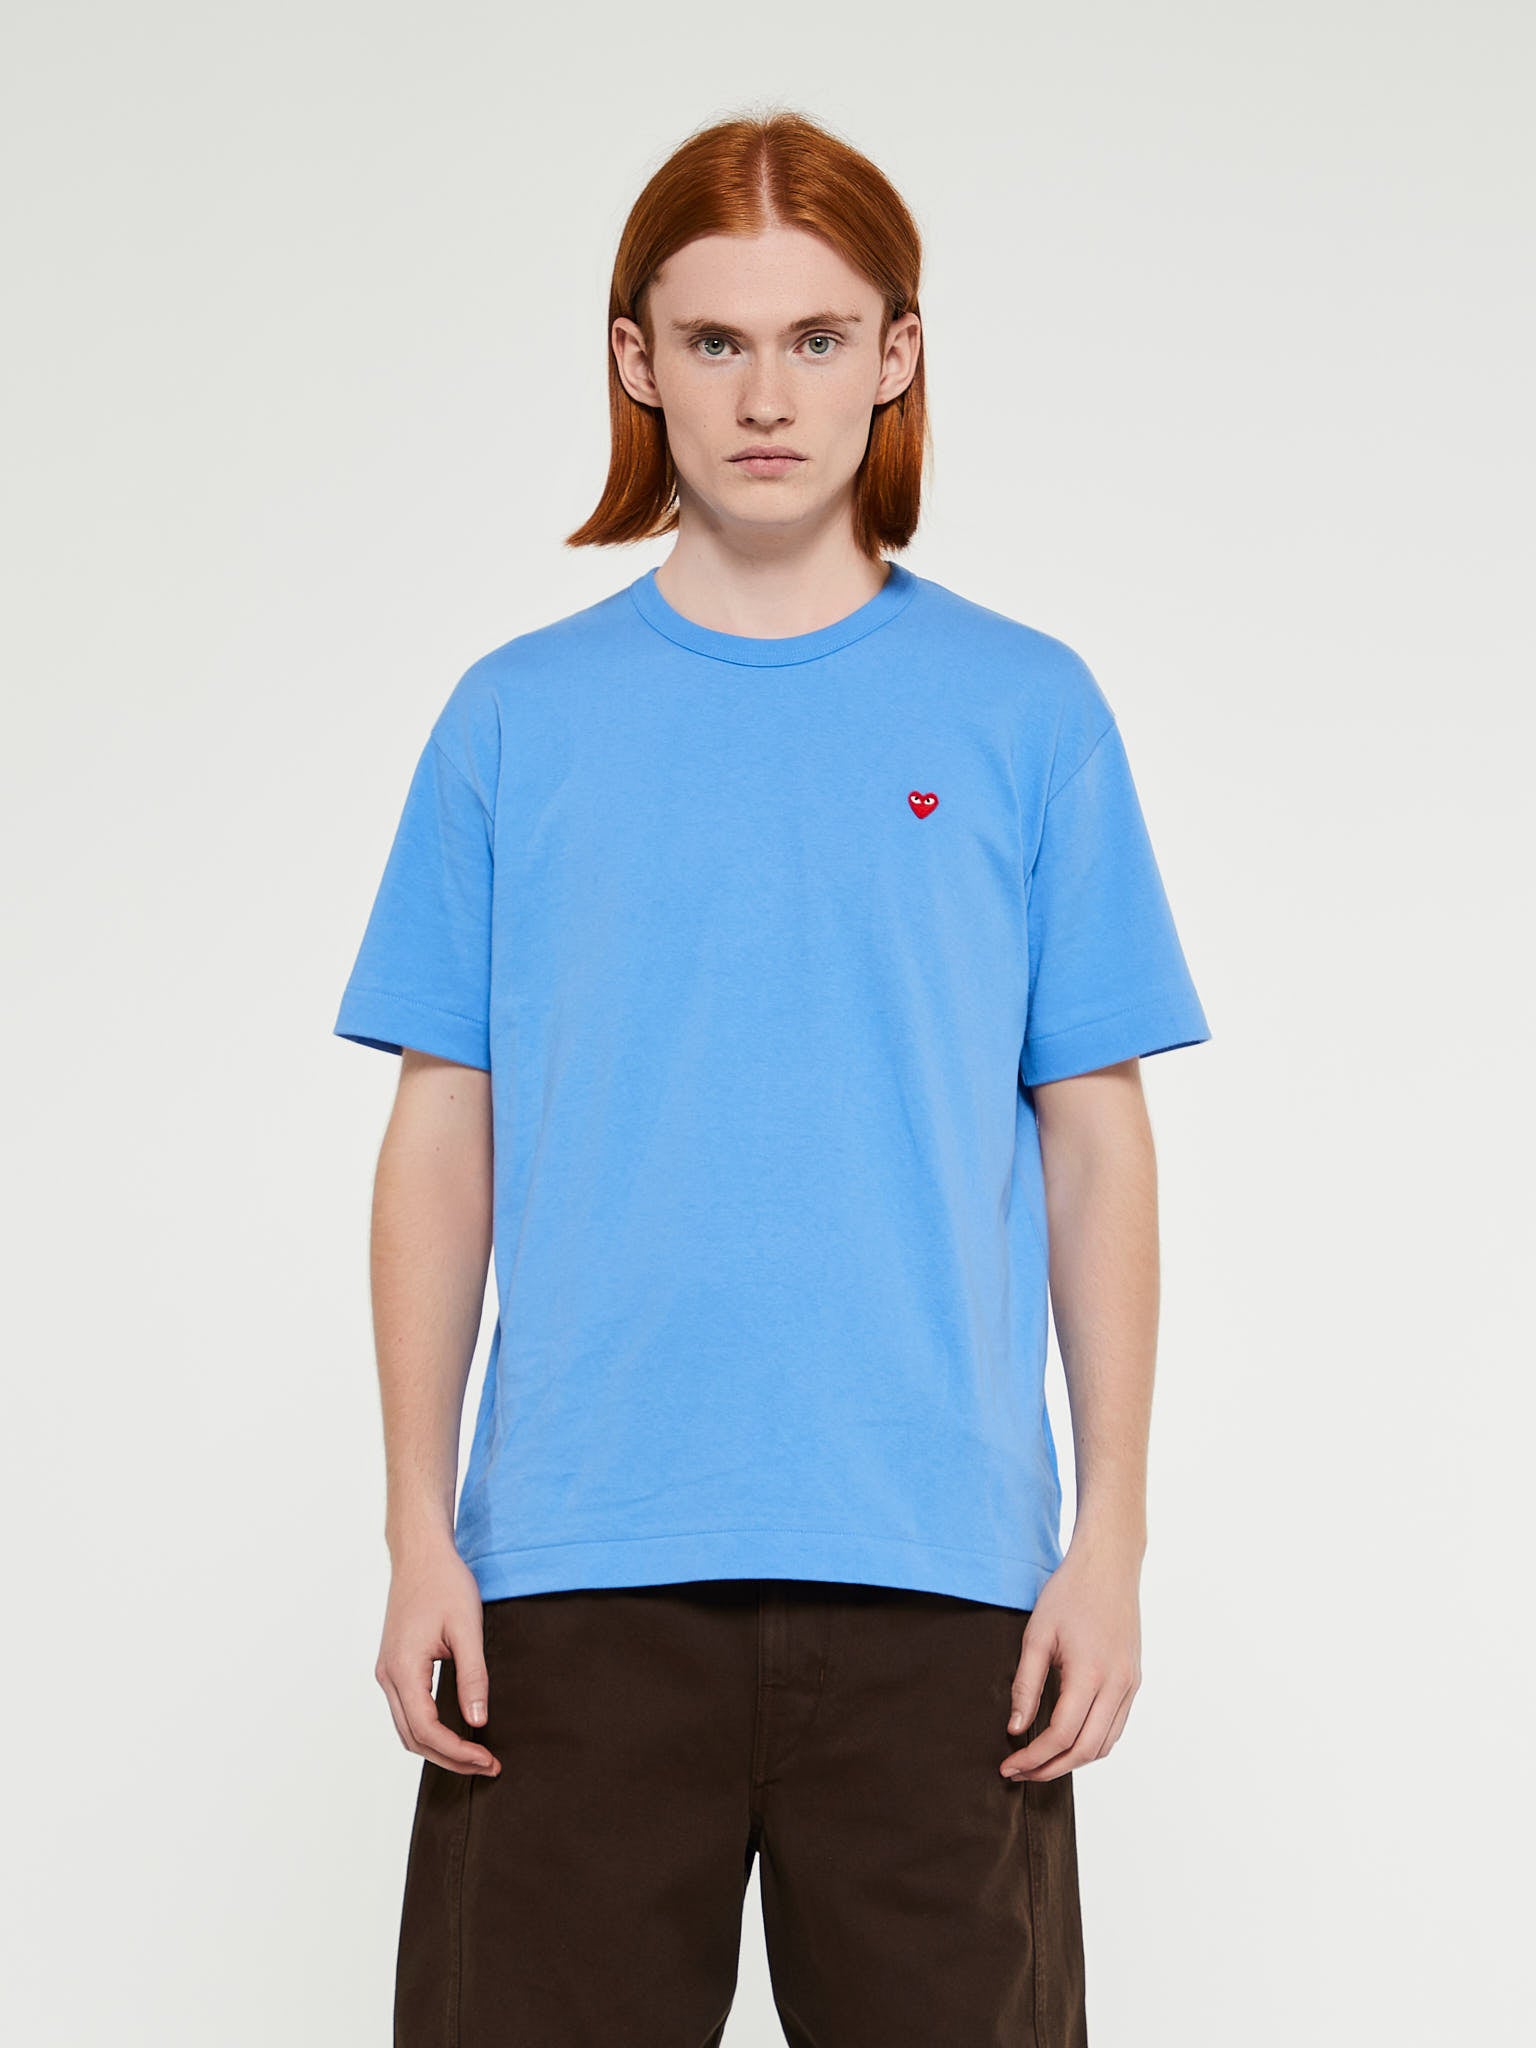 Small Red Heart T-Shirt in Blue